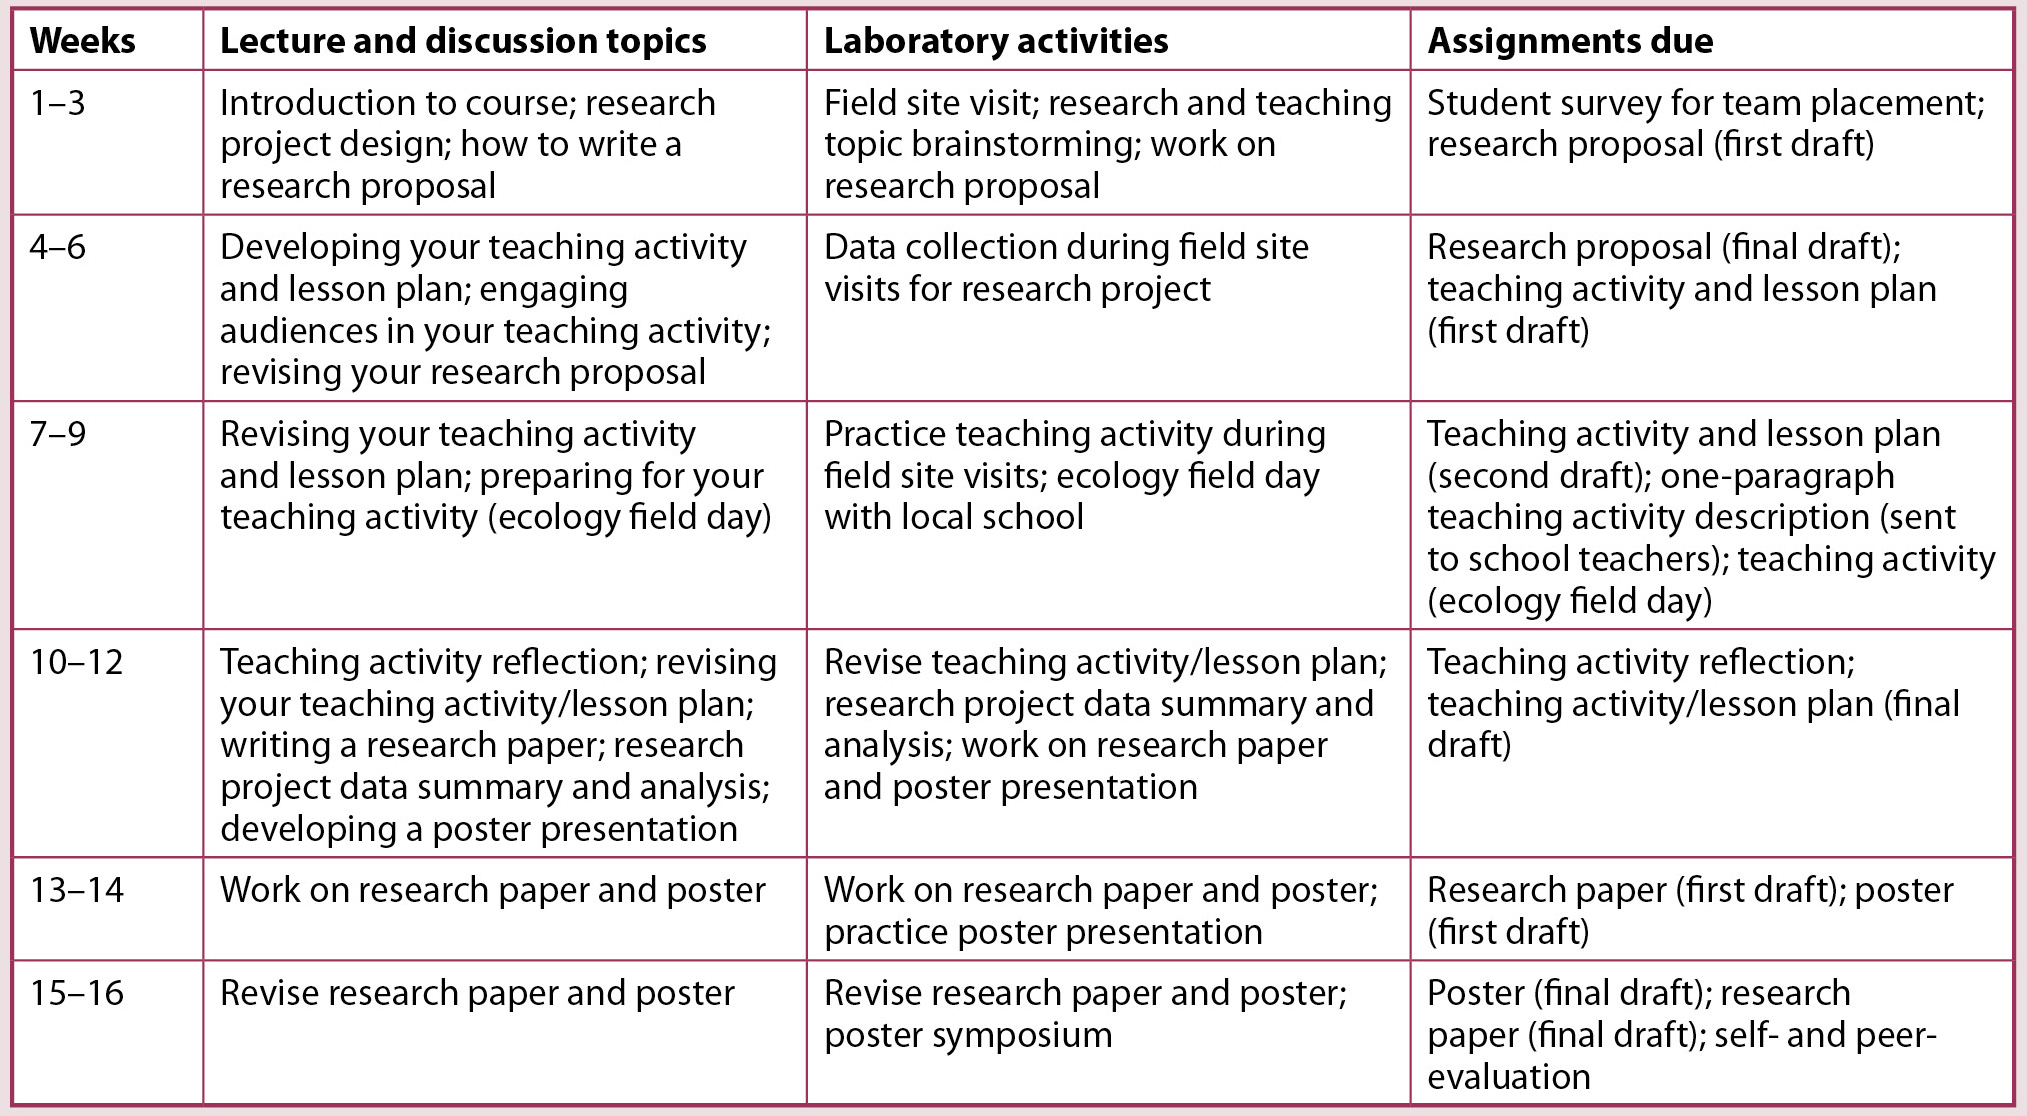 Field Ecology Research and Teaching course schedule. 